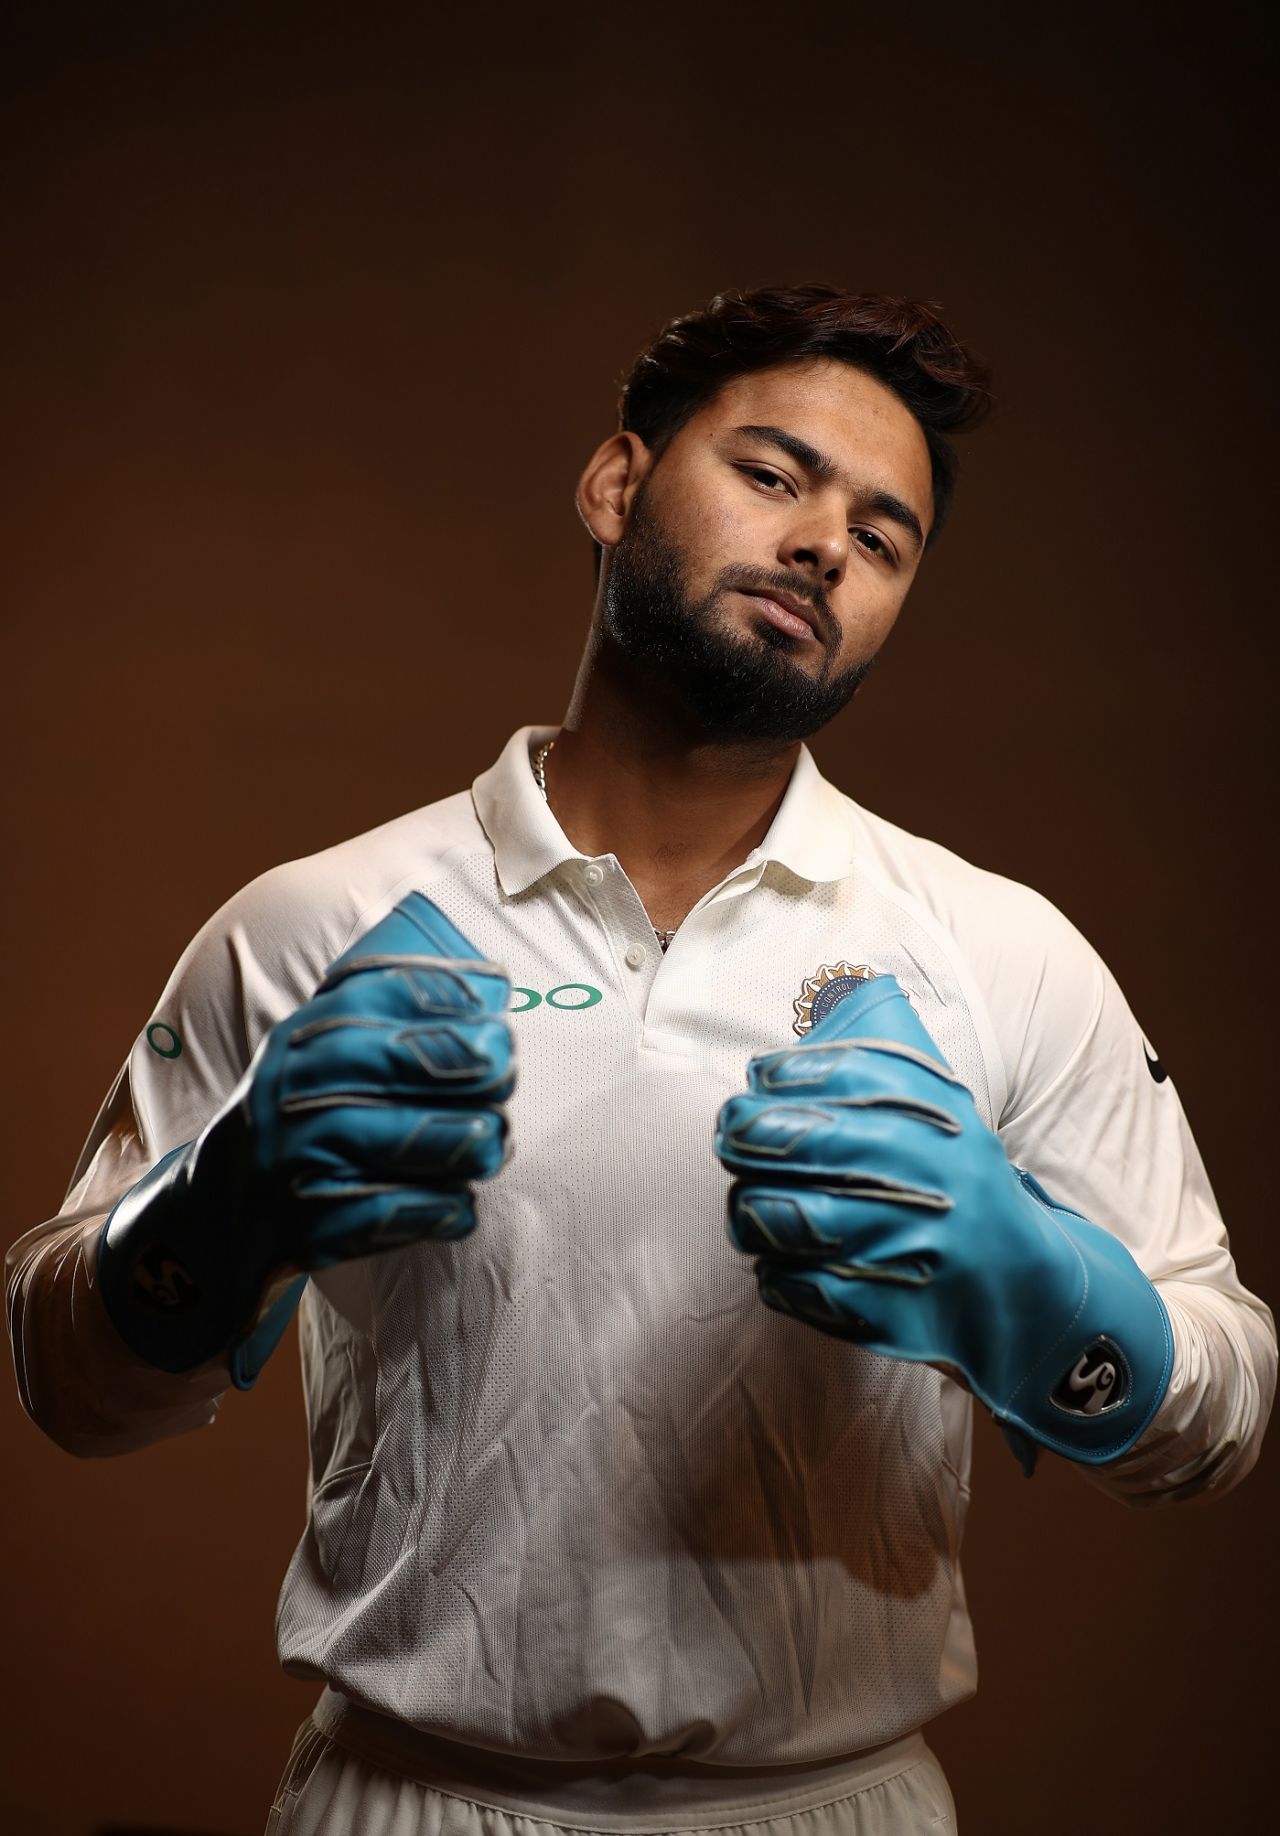 Rishabh Pant strikes a pose during a photo session, Adelaide, December 3, 2018